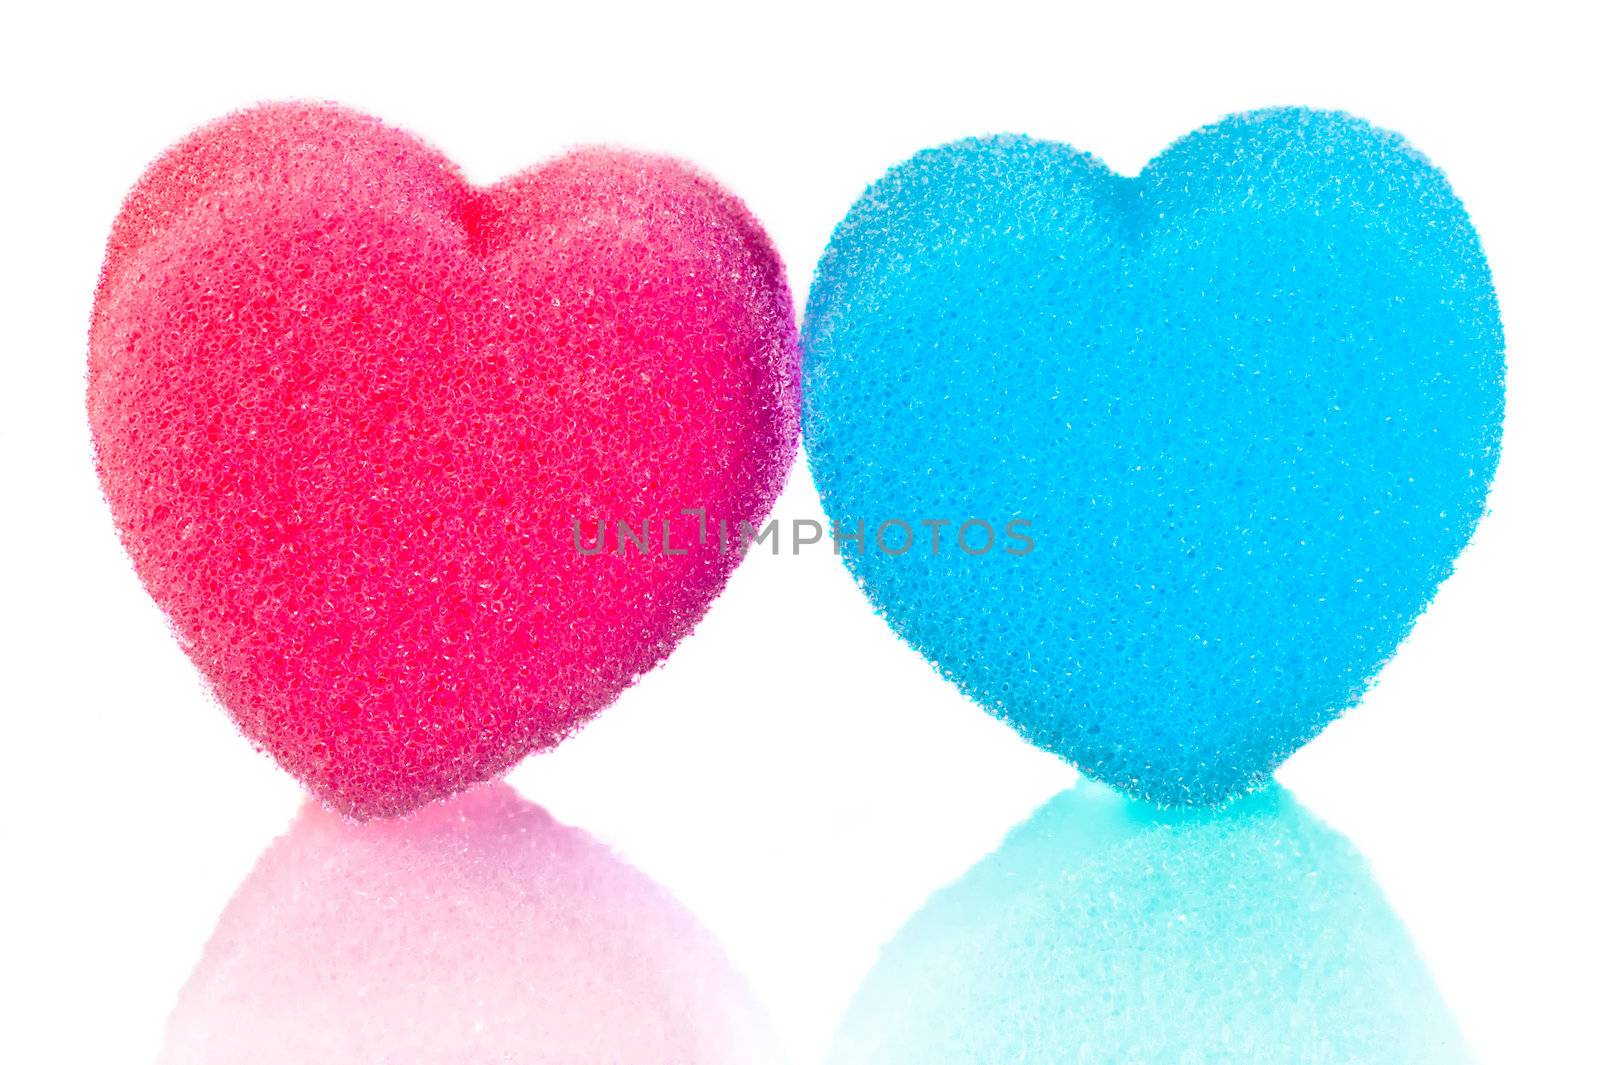 Two hearts of blue and pink lips on a white background by kosmsos111